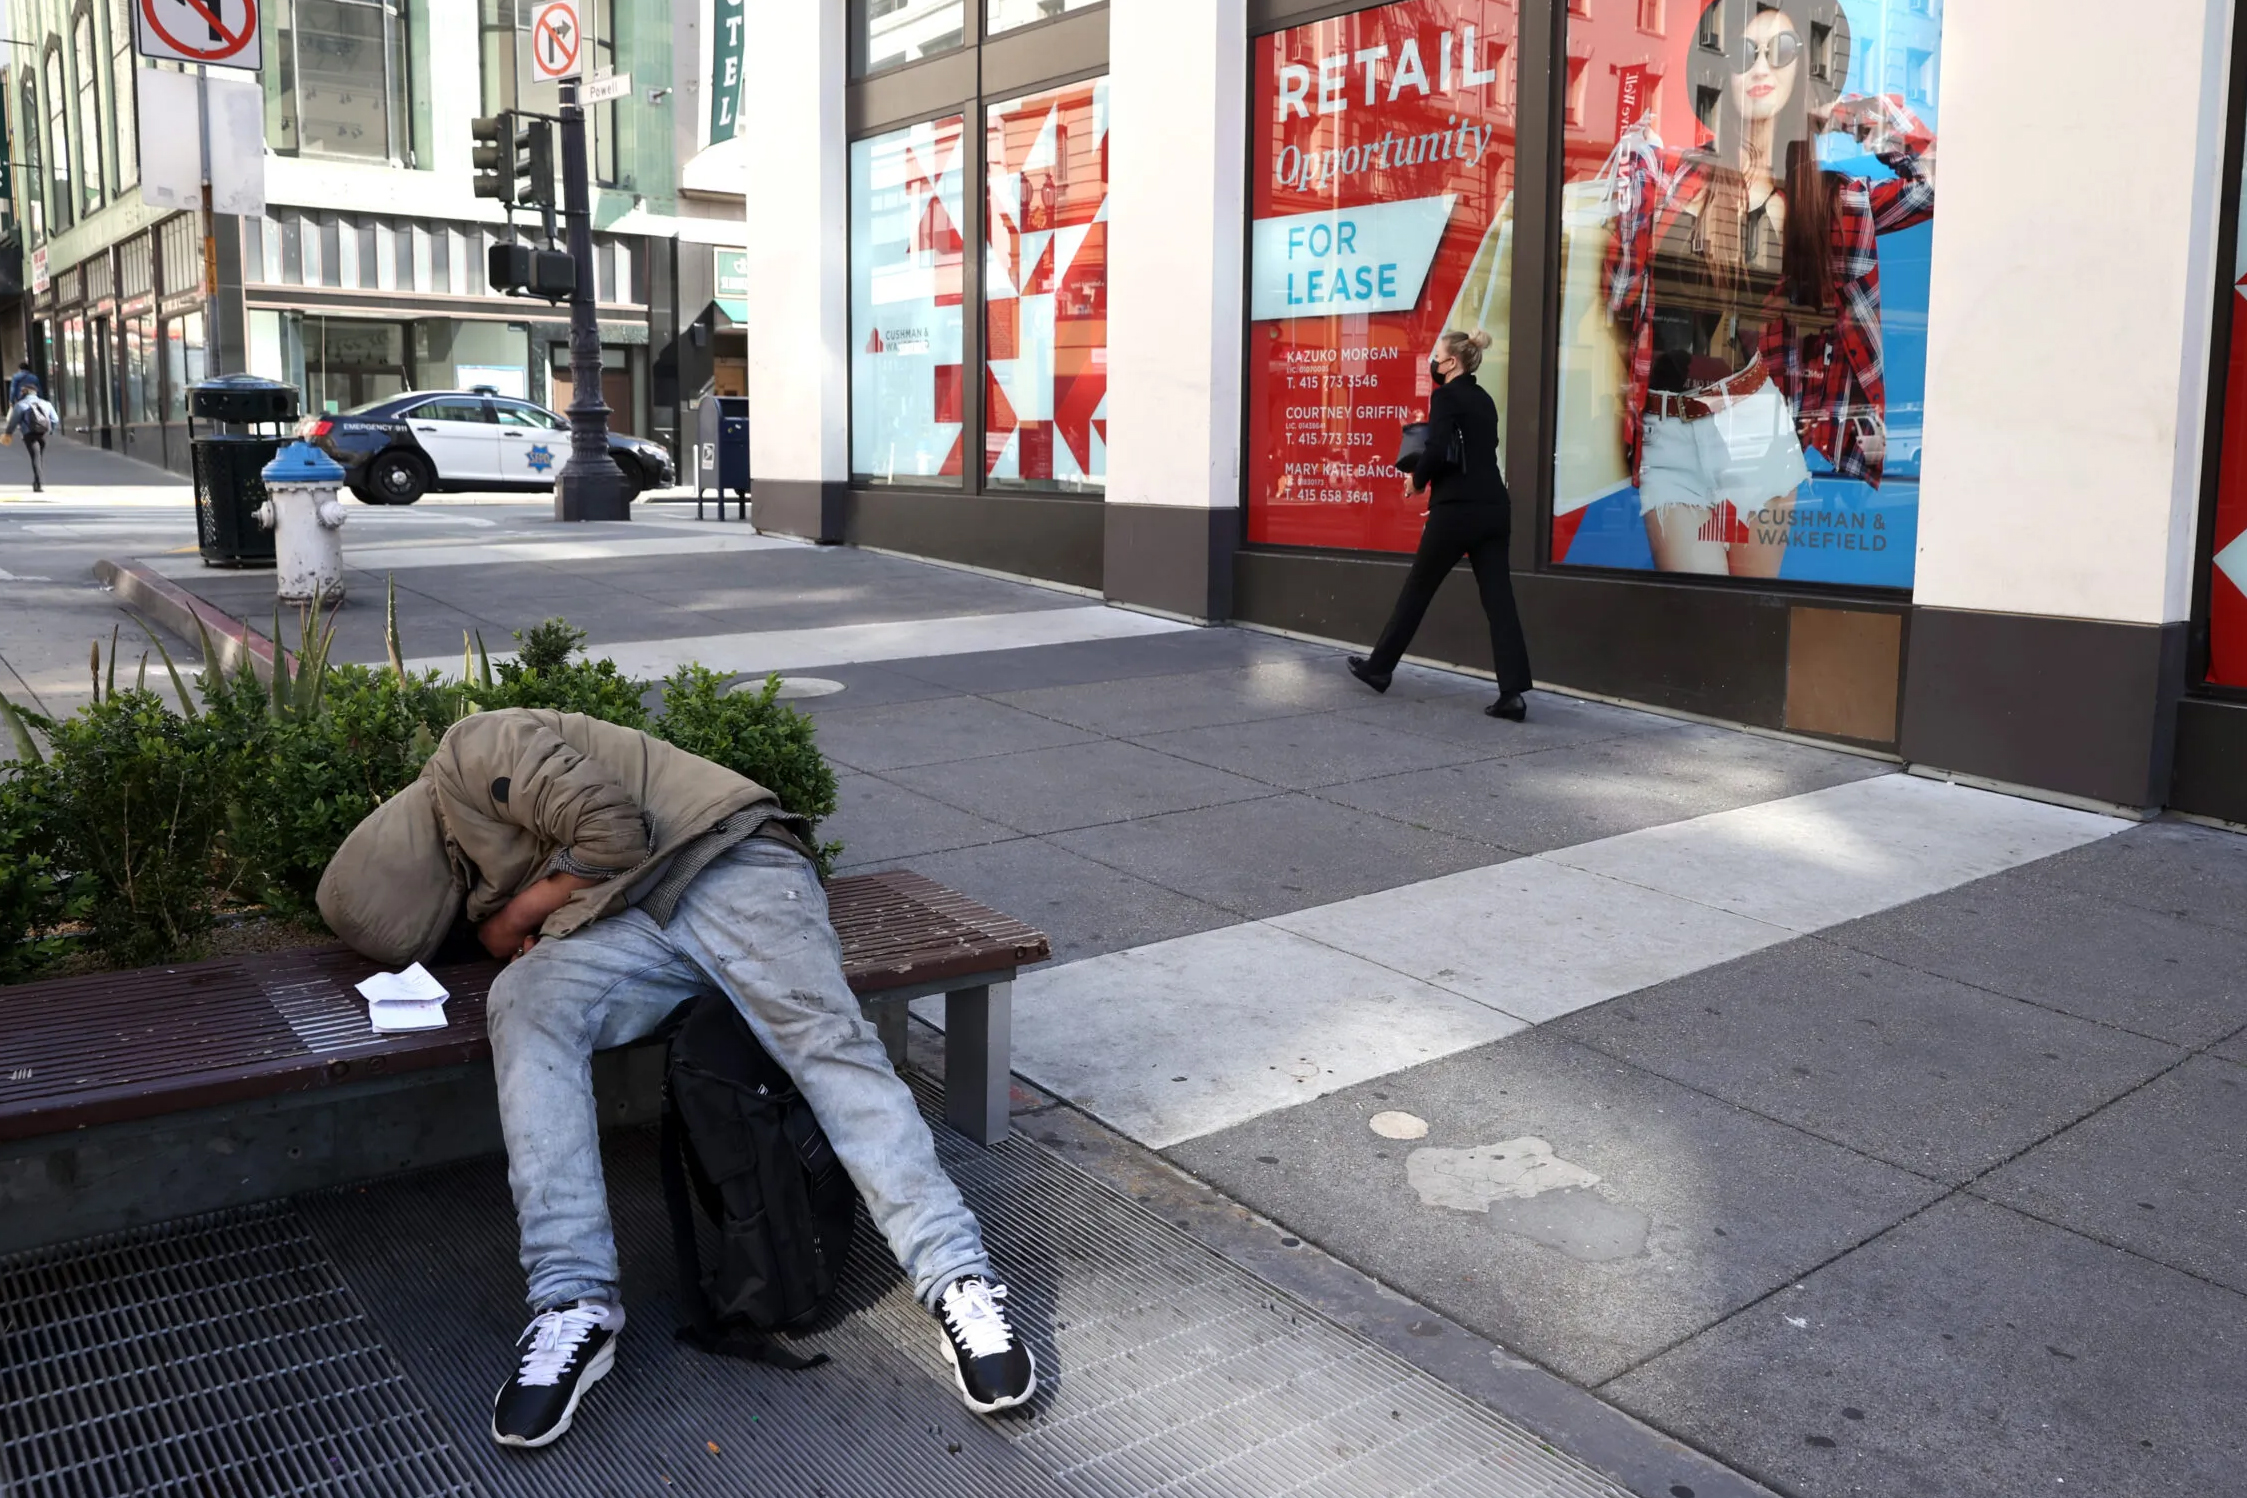 A homeless person sleeps on a bench in front of closed retail stores